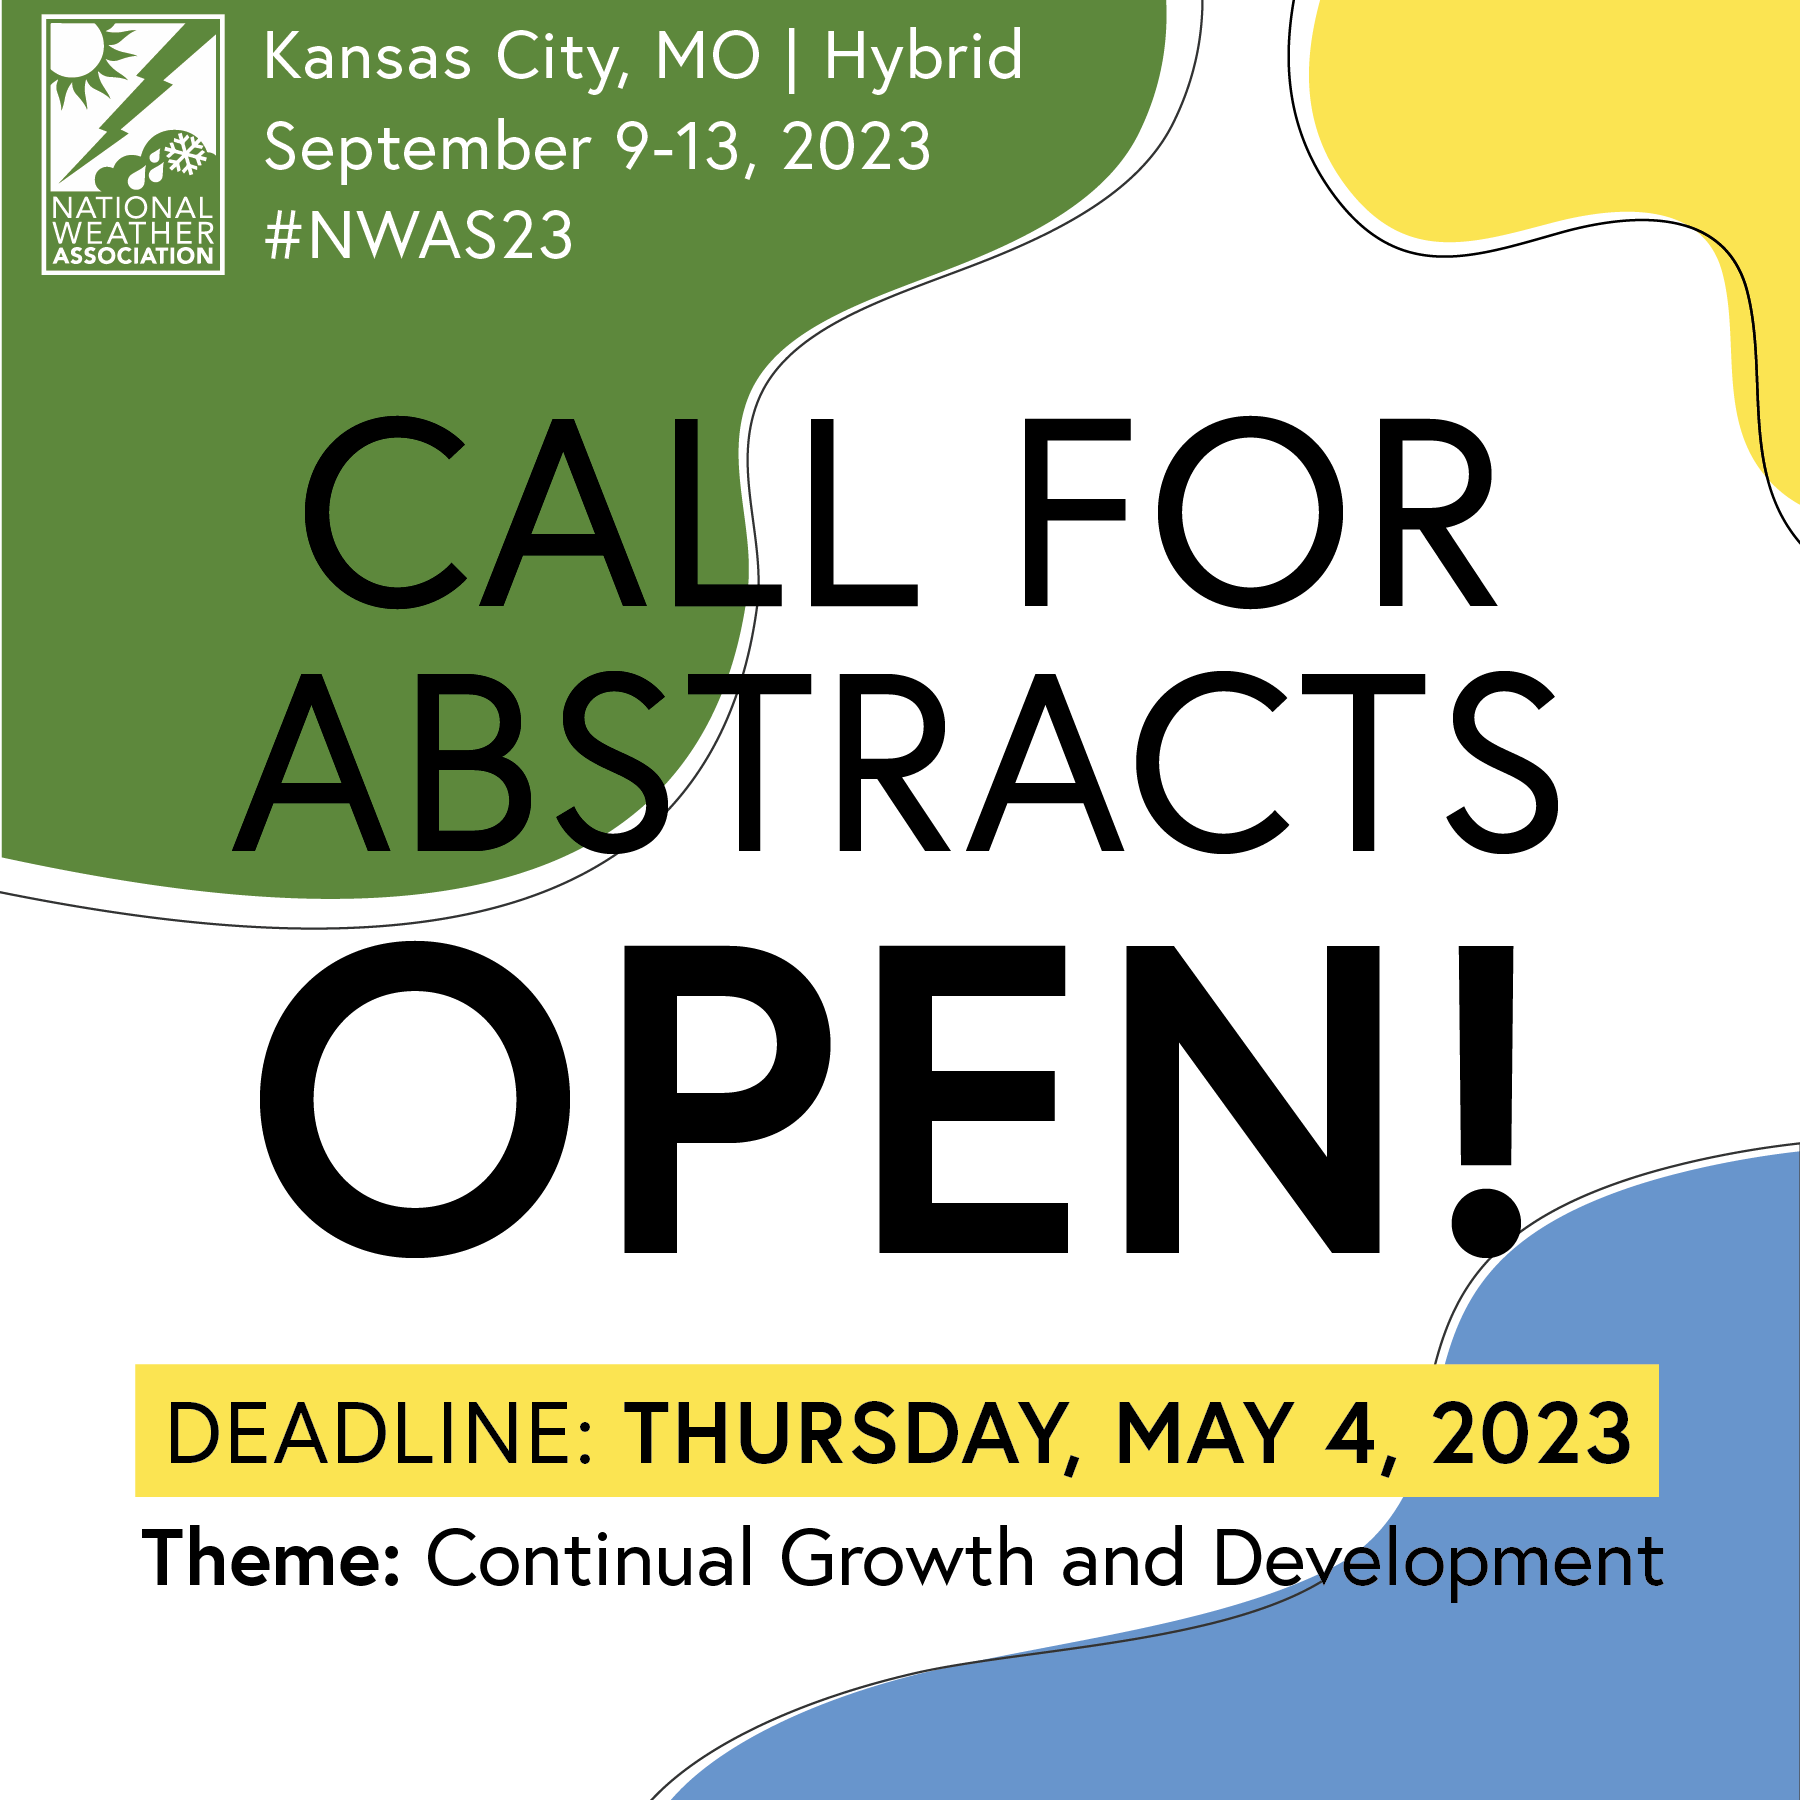 Call for Abstracts deadline: May 4, 2023